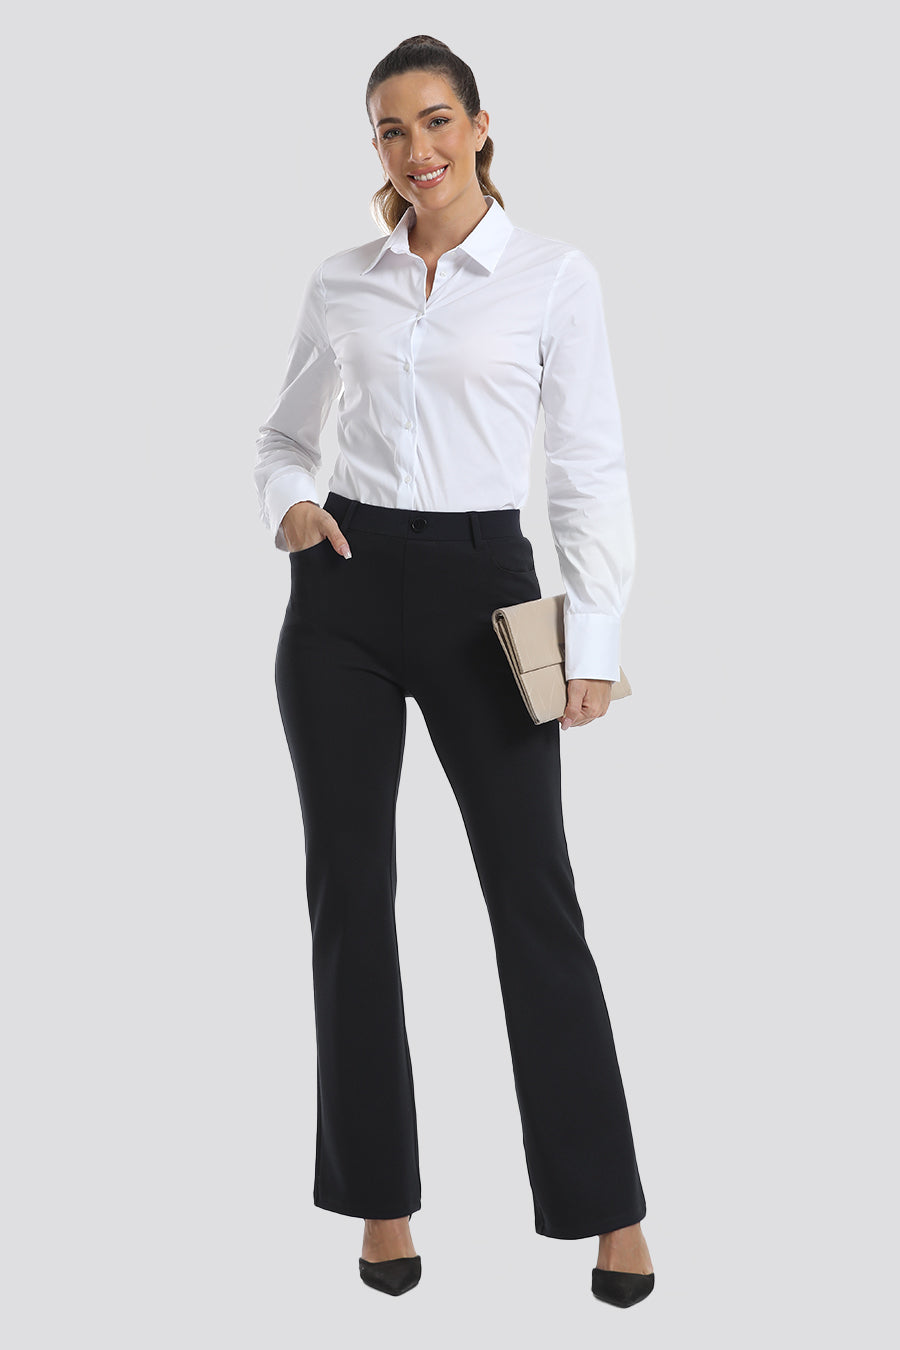 Women's Business Casual Pants 31, 42% OFF